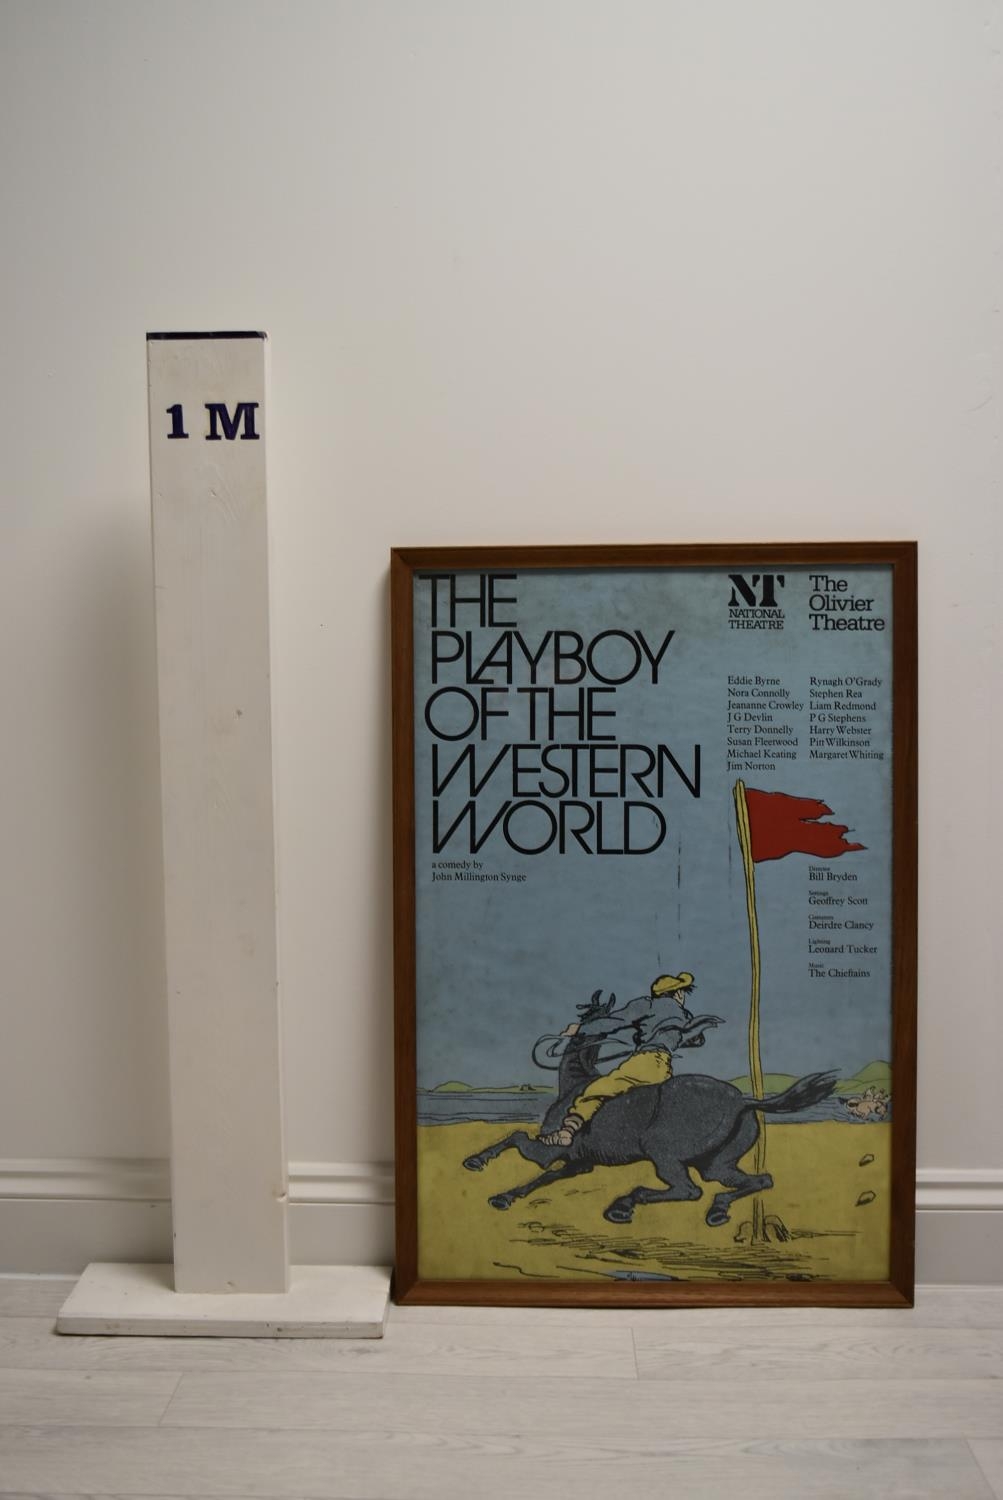 A National Theatre and Olivier Theatre framed theatre poster, The Playboy of the Western World - Image 3 of 3